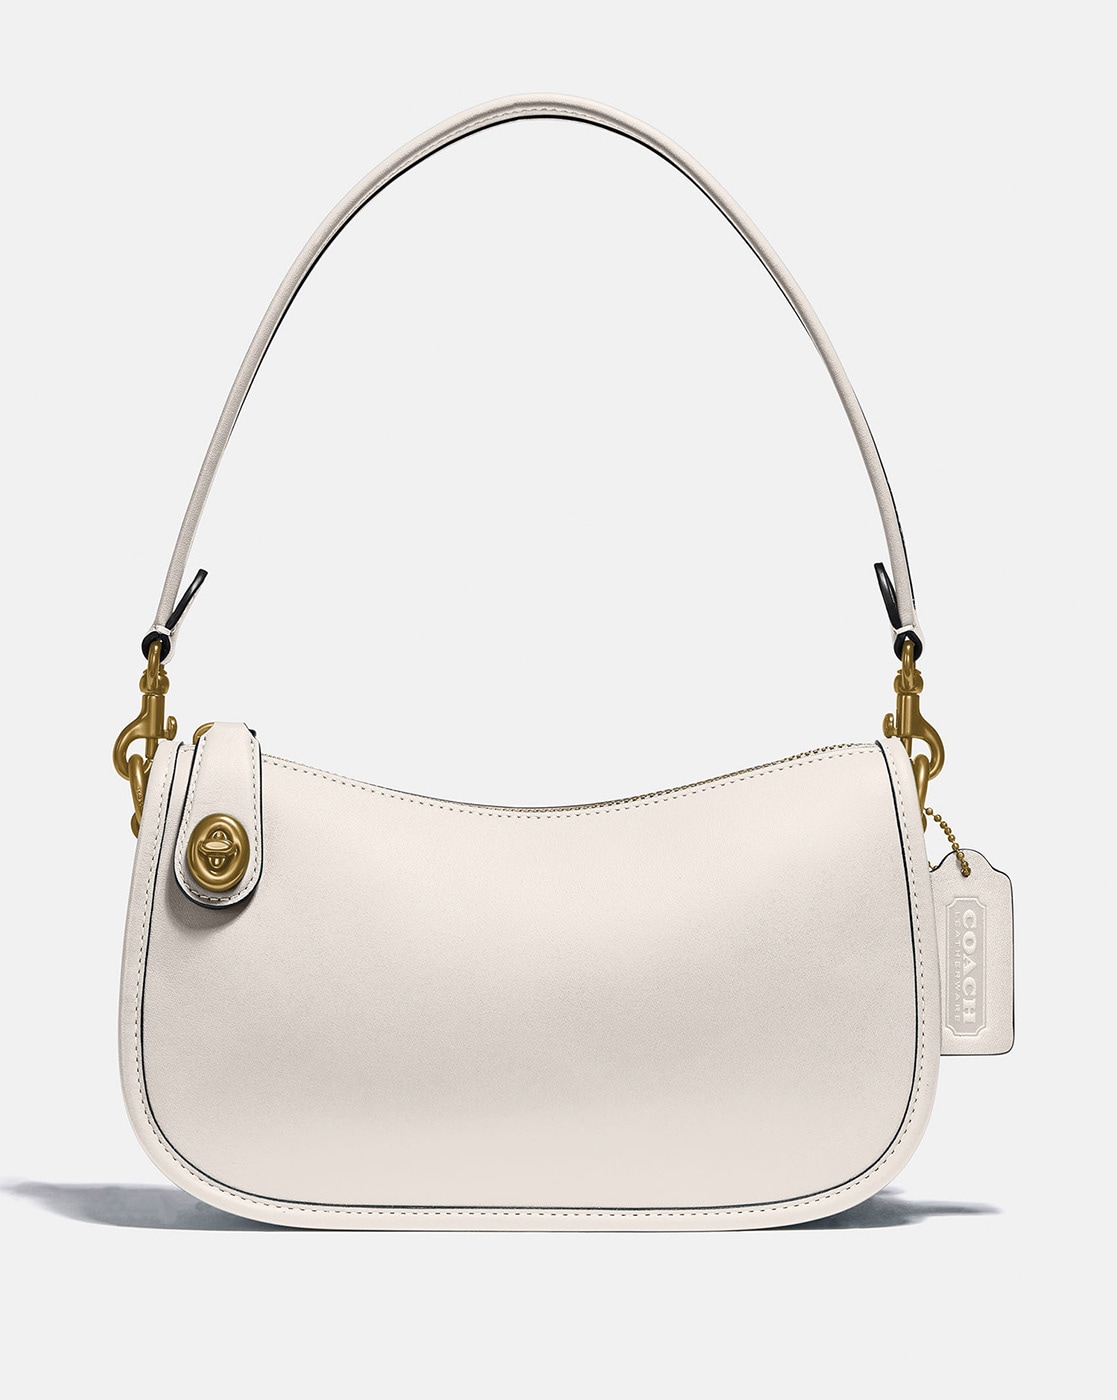 Women's Bags | Shop Exclusive Styles | CHARLES & KEITH International